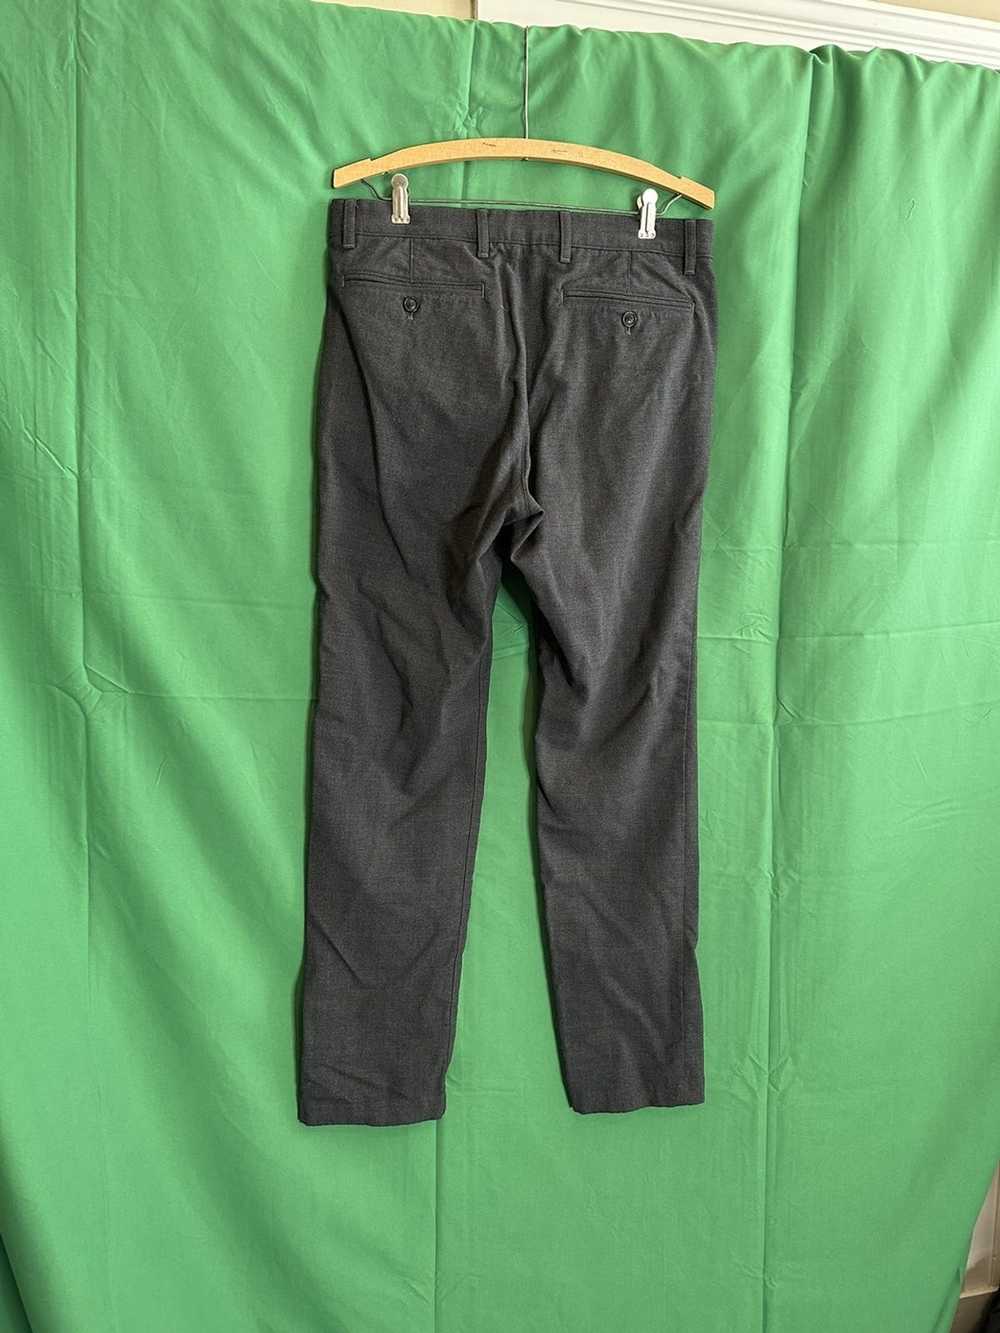 Theory Dark gray flat front pants / trousers - image 6